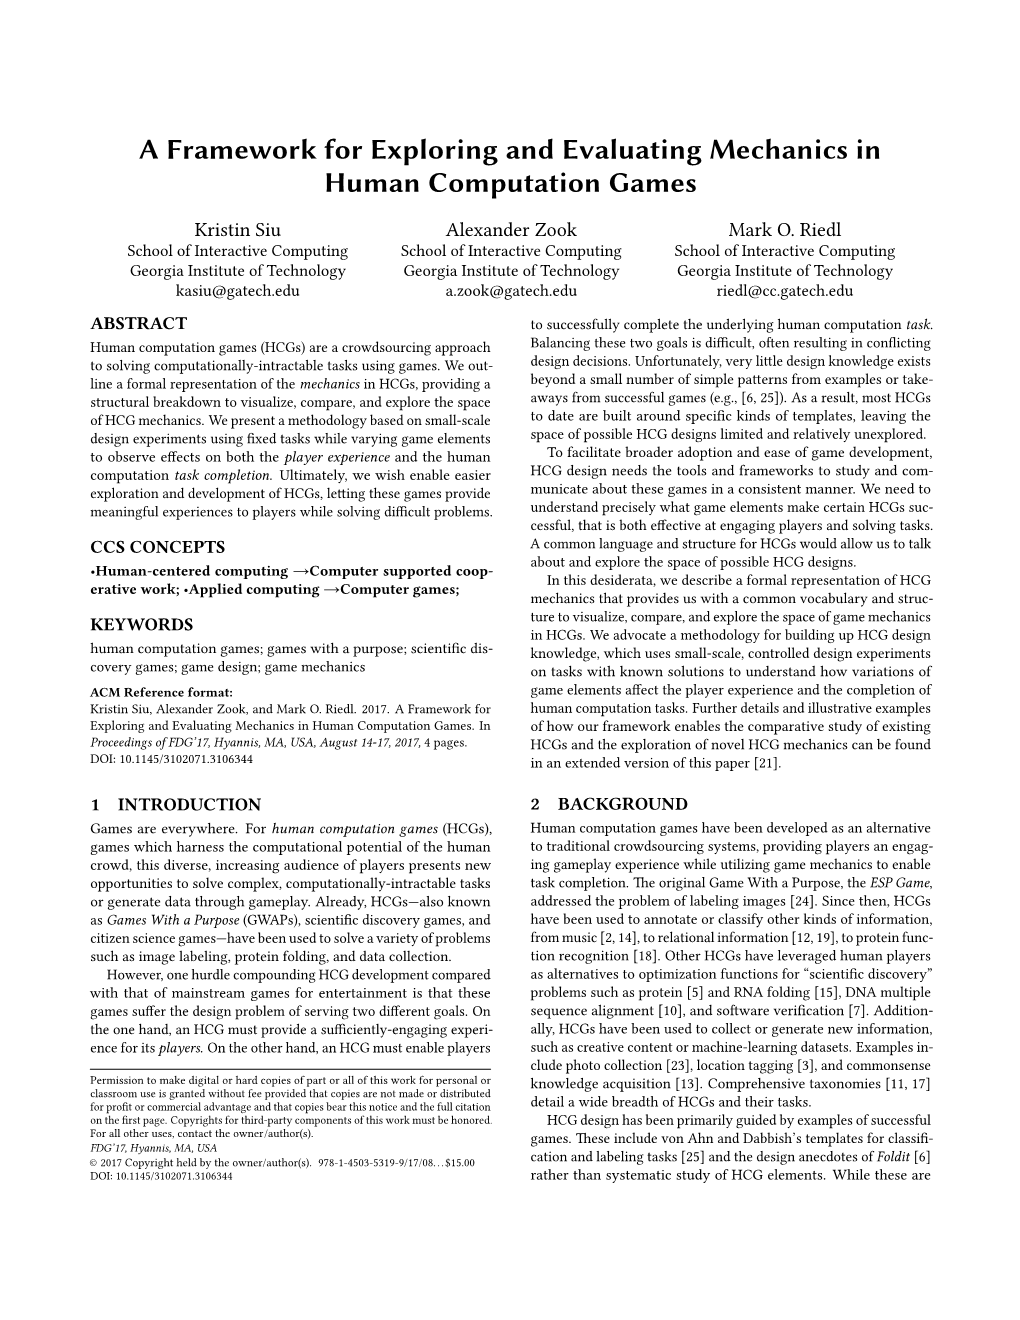 A Framework for Exploring and Evaluating Mechanics in Human Computation Games